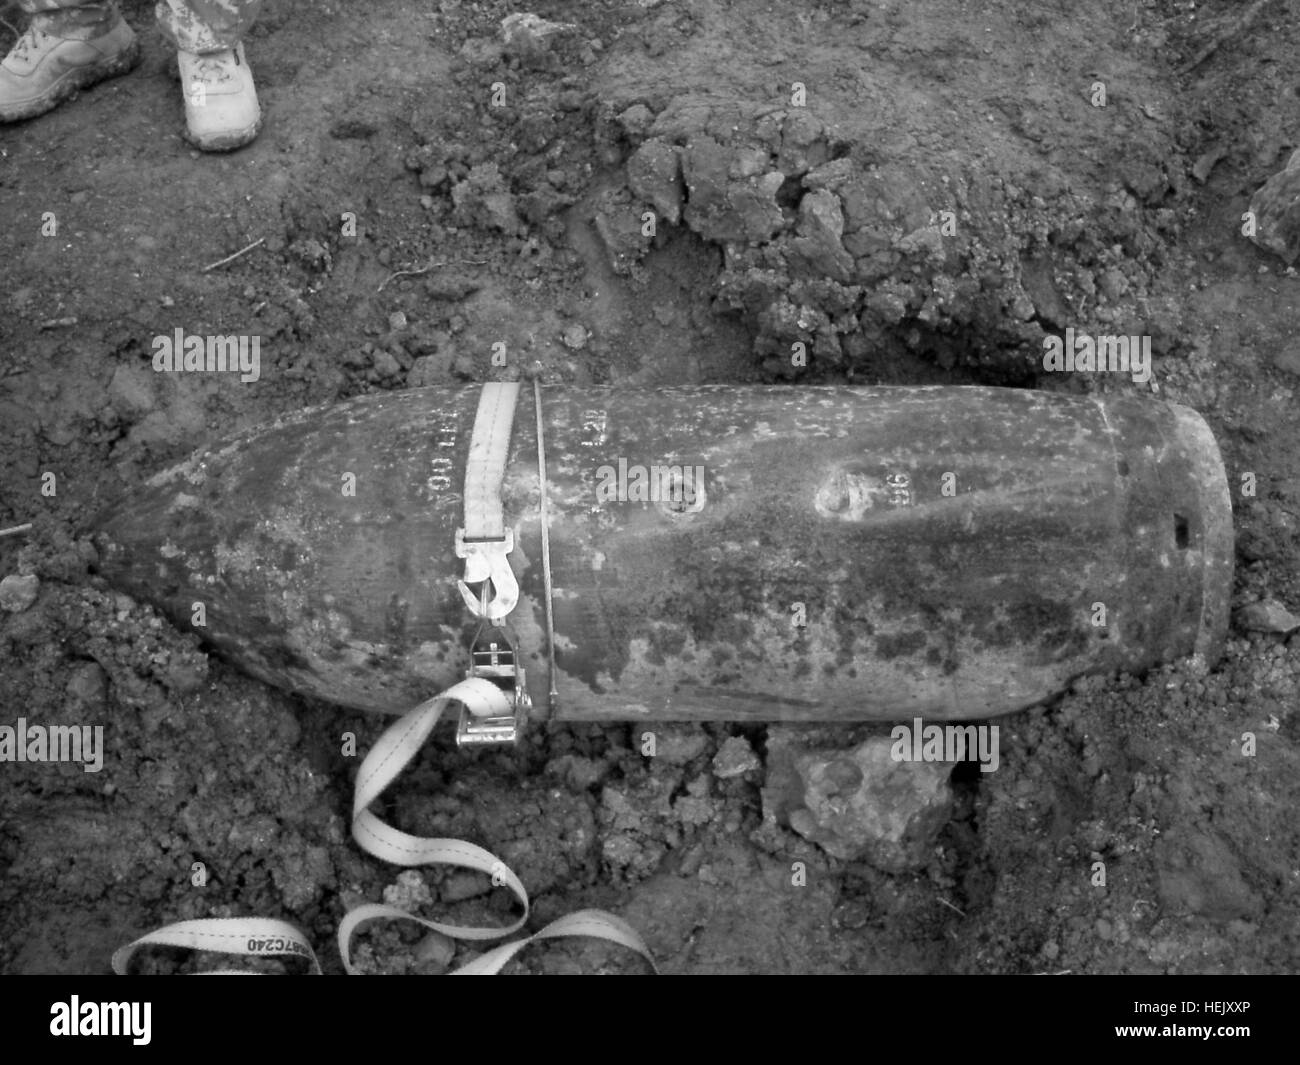 A British Mk13 1,000 pound bomb was discovered by construction workers excavating the land behind a small industrial facility near Mt. Goles, Kosovo. The site was home to Yugoslavian ammunition bunkers during the Kosovo conflict. It is most likely that the unexploded bomb was purposely dropped during the 1999 NATO bombing campaign, according to Cpt. Frank Pangelinan, commander of the 217th Explosive Ordnance Company, deployed to Kosovo as part of Multinational Battle Group- East. The California National Guard Unit arrived in Kosovo in September 2012. Since then, they have responded to 94 incid Stock Photo